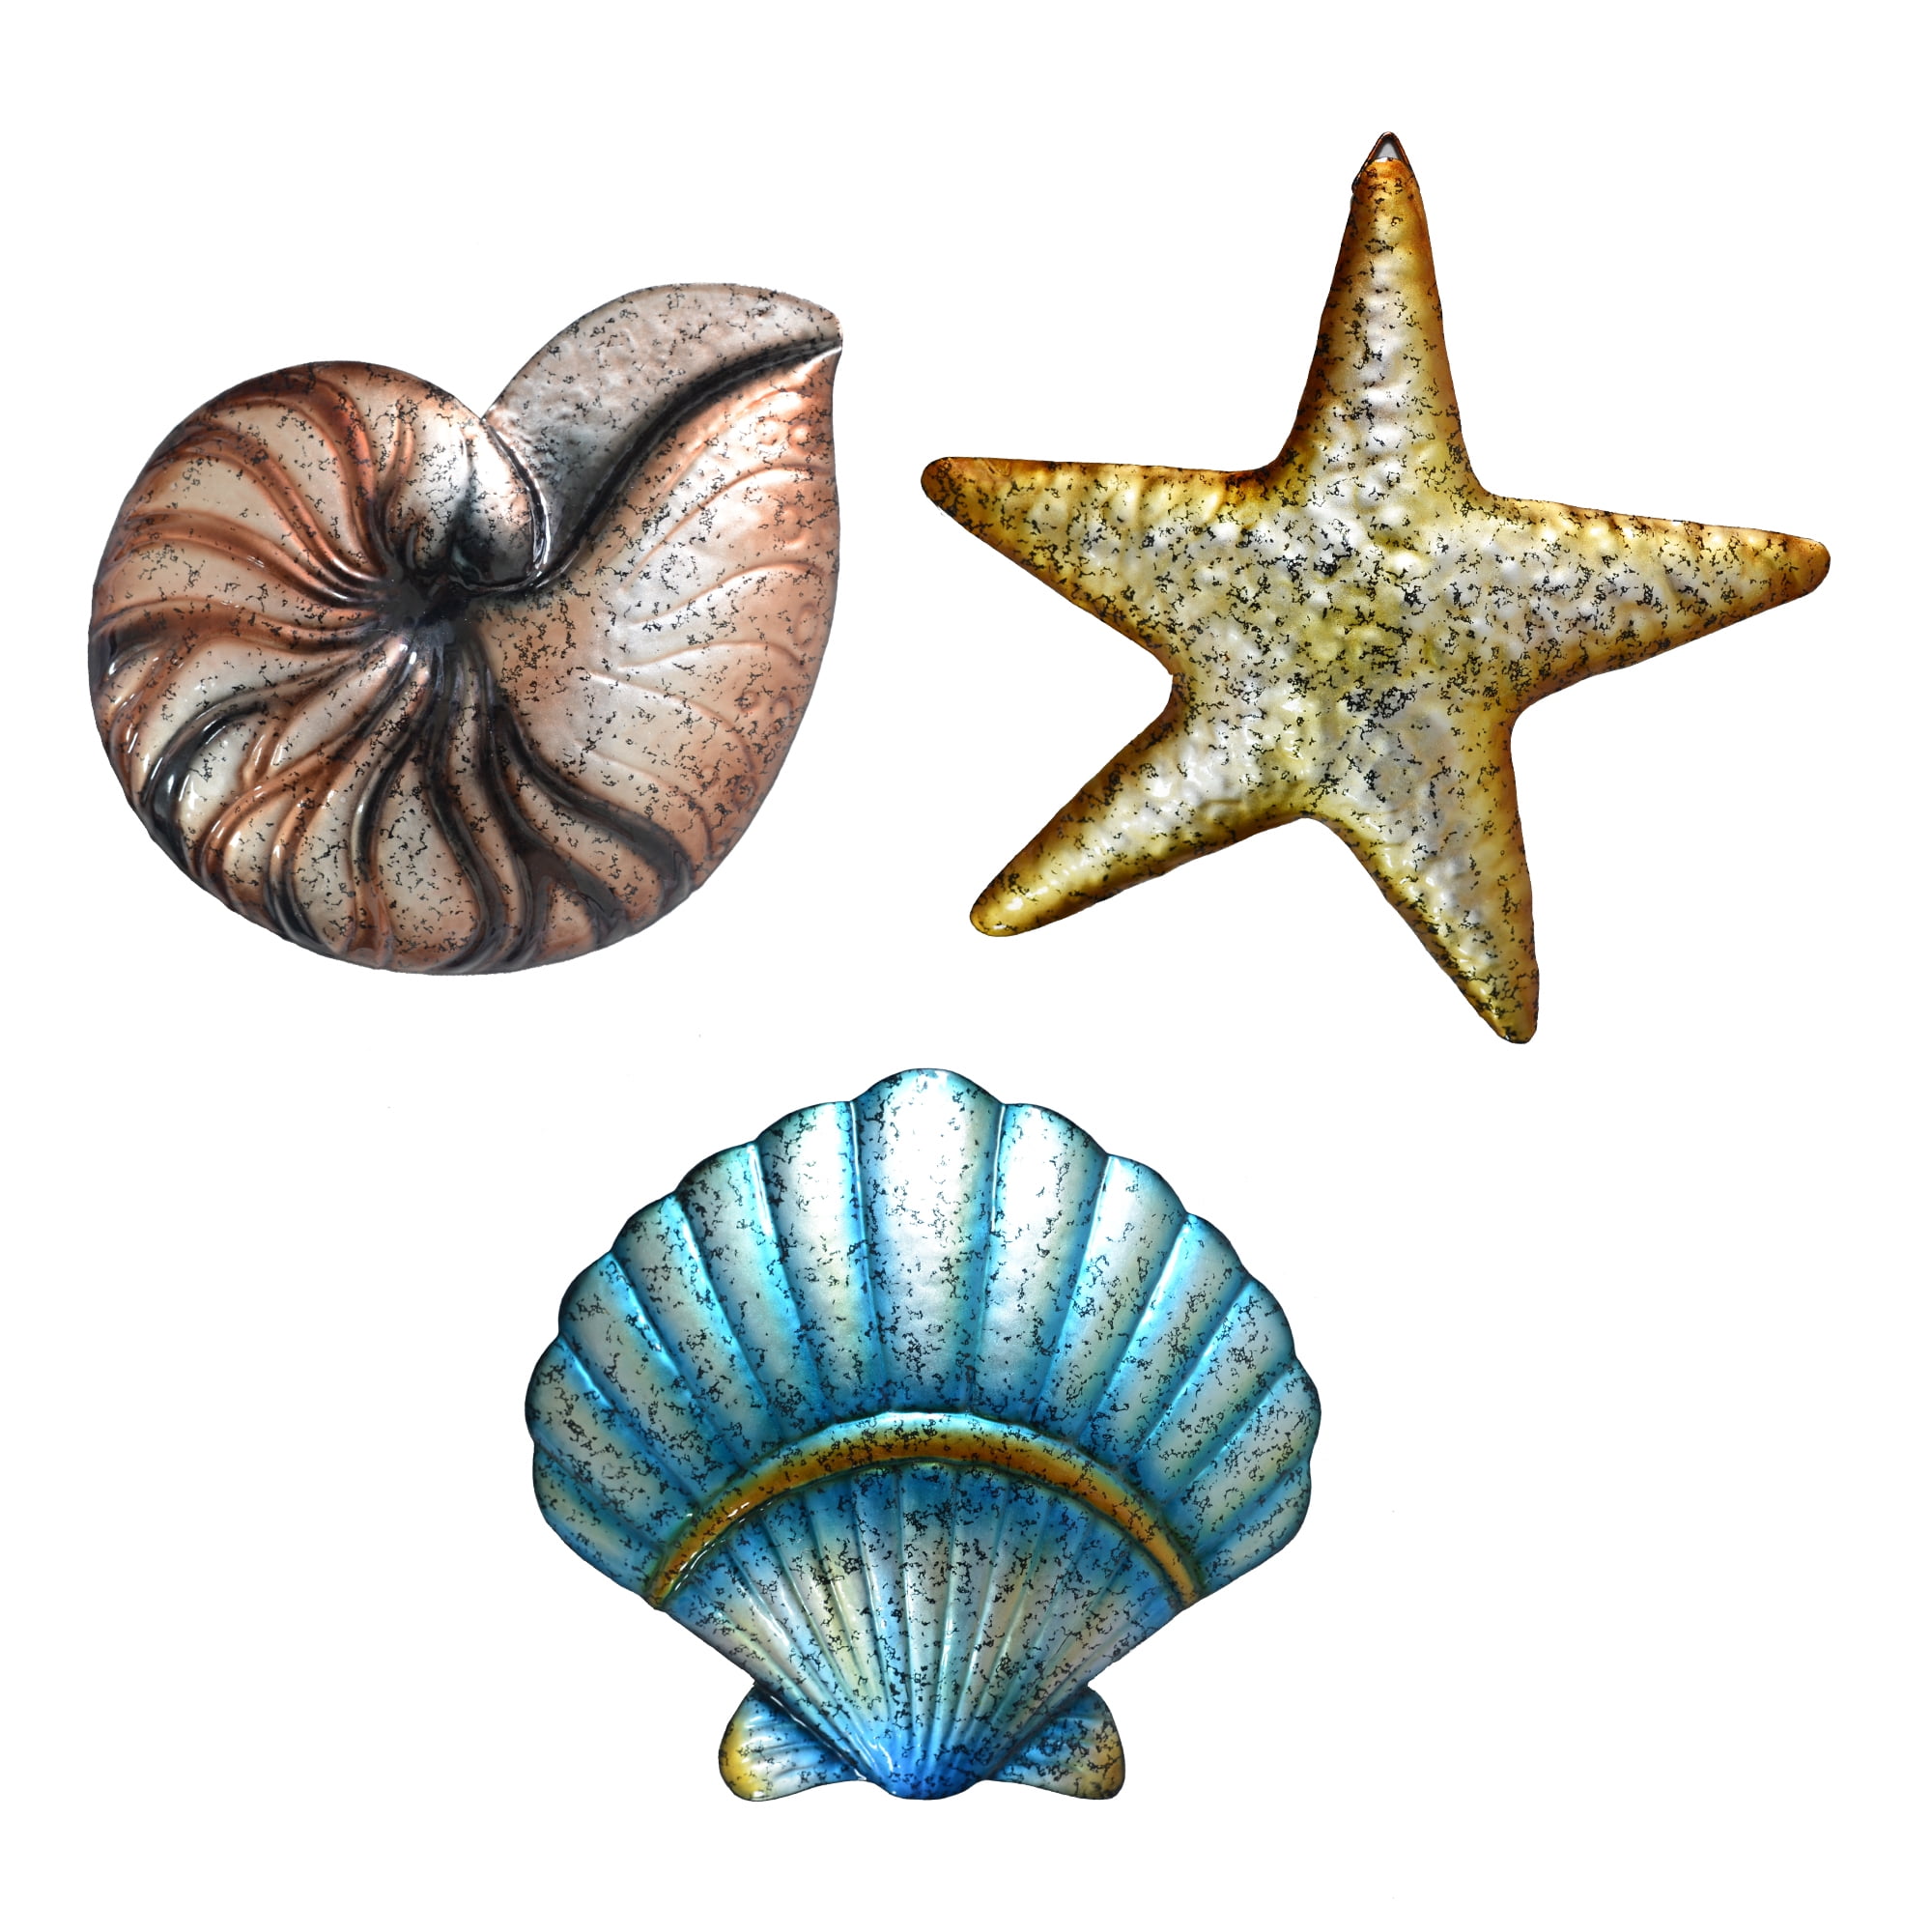 A Collection Of Nautical Decorations Featuring Shells And Starfish In  Bright Colors Stock Photo, Picture and Royalty Free Image. Image 204019343.